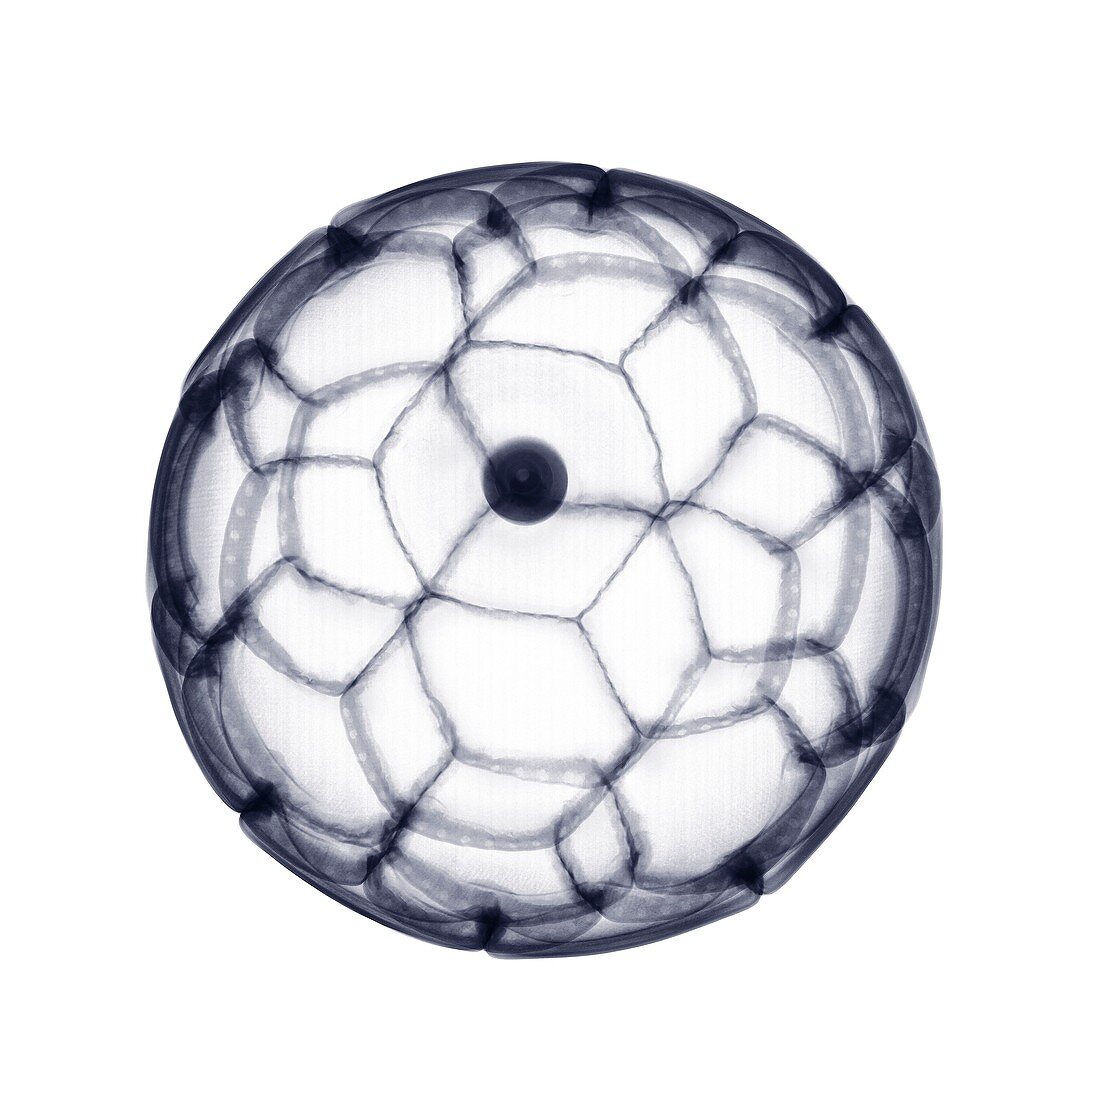 Leather football, X-ray